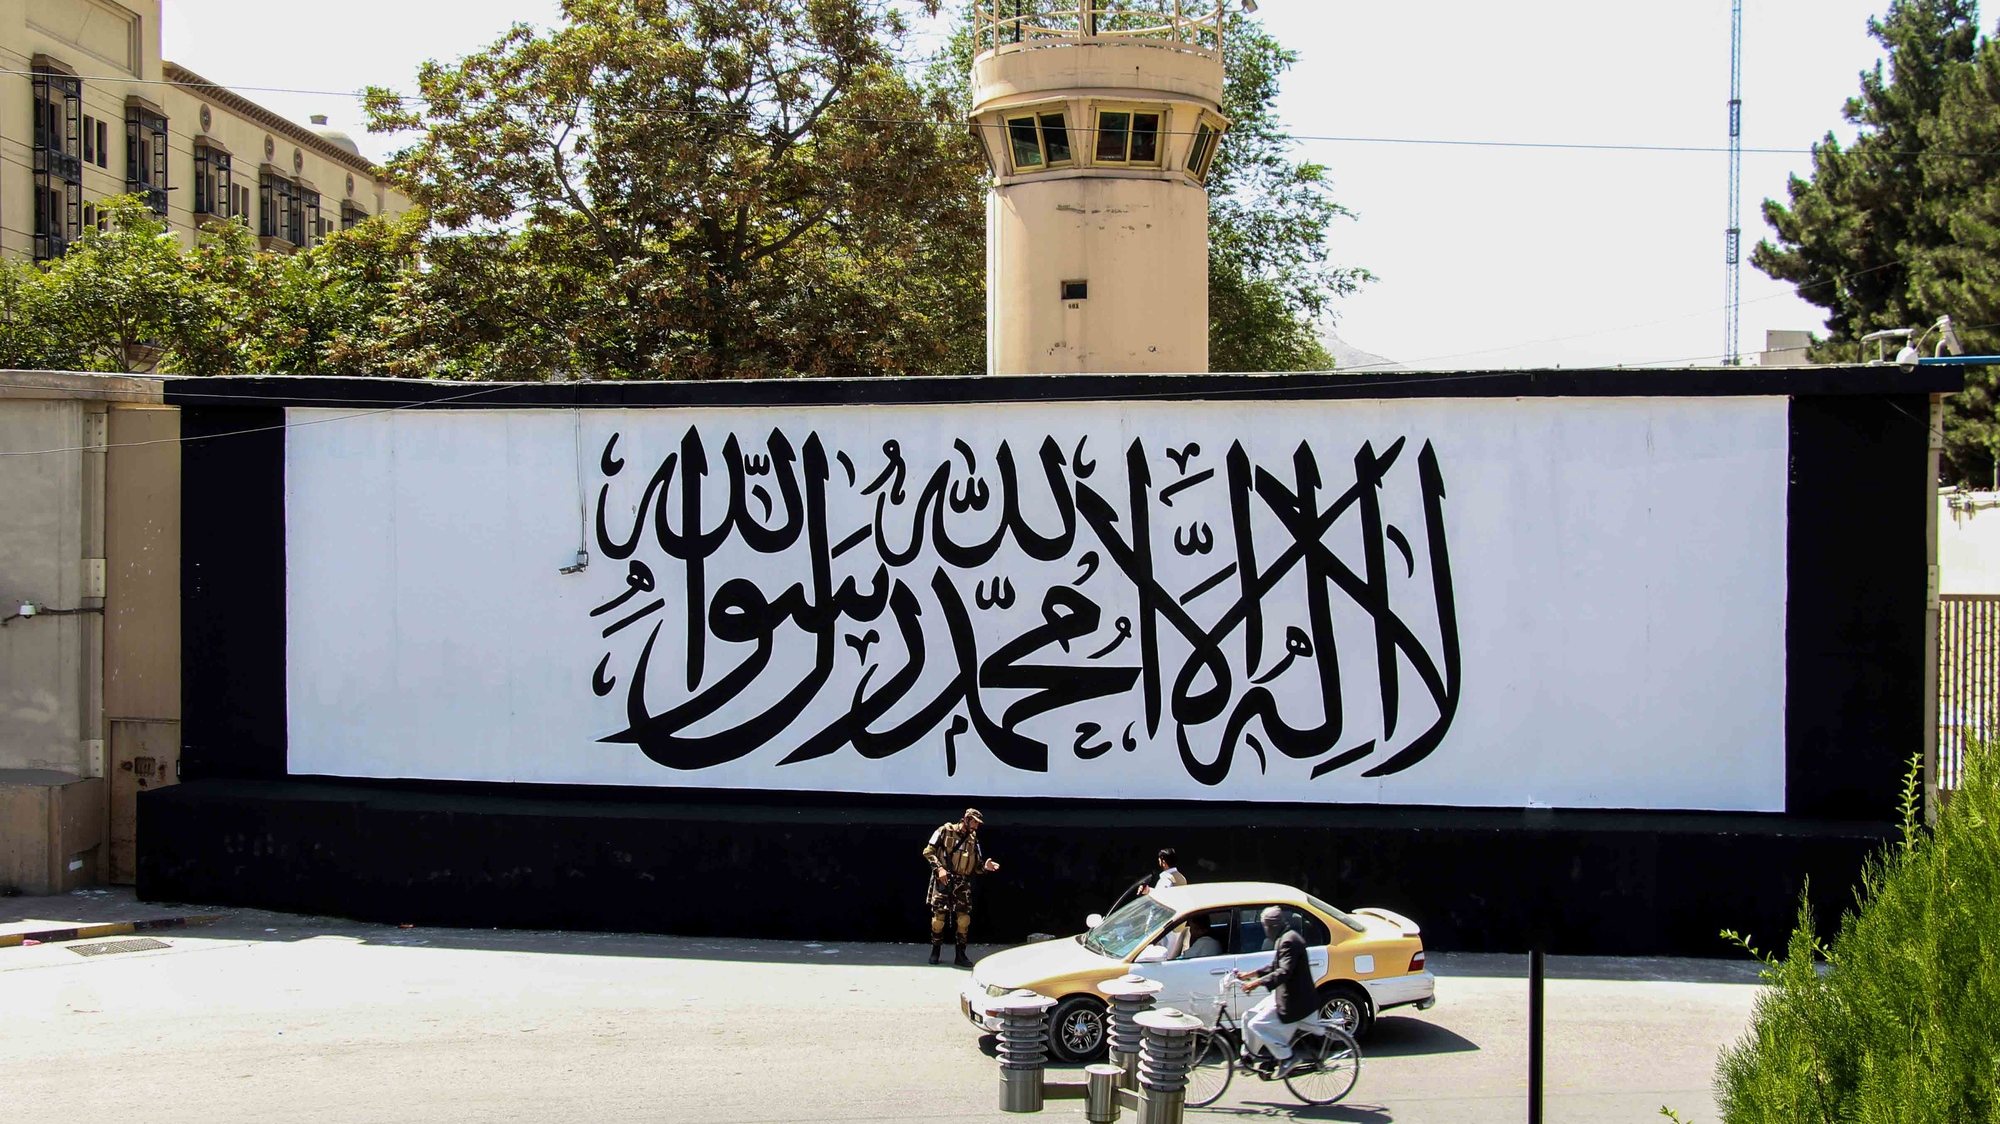 epa09455301 Taliban stand guard outside the building of former US embassy as the wall painted with text in Arabic &quot;There is not God but Allah, Muhammad is the messenger of Allah&#039; in Kabul, Afghanistan, 08 September 2021. Hundreds of protesters on 08 September, came out on the streets of cities across Afghanistan to demand their rights, a day after the Taliban officially announced the formation of a new government consisting exclusively of fundamentalists from their ranks.  EPA/STRINGER